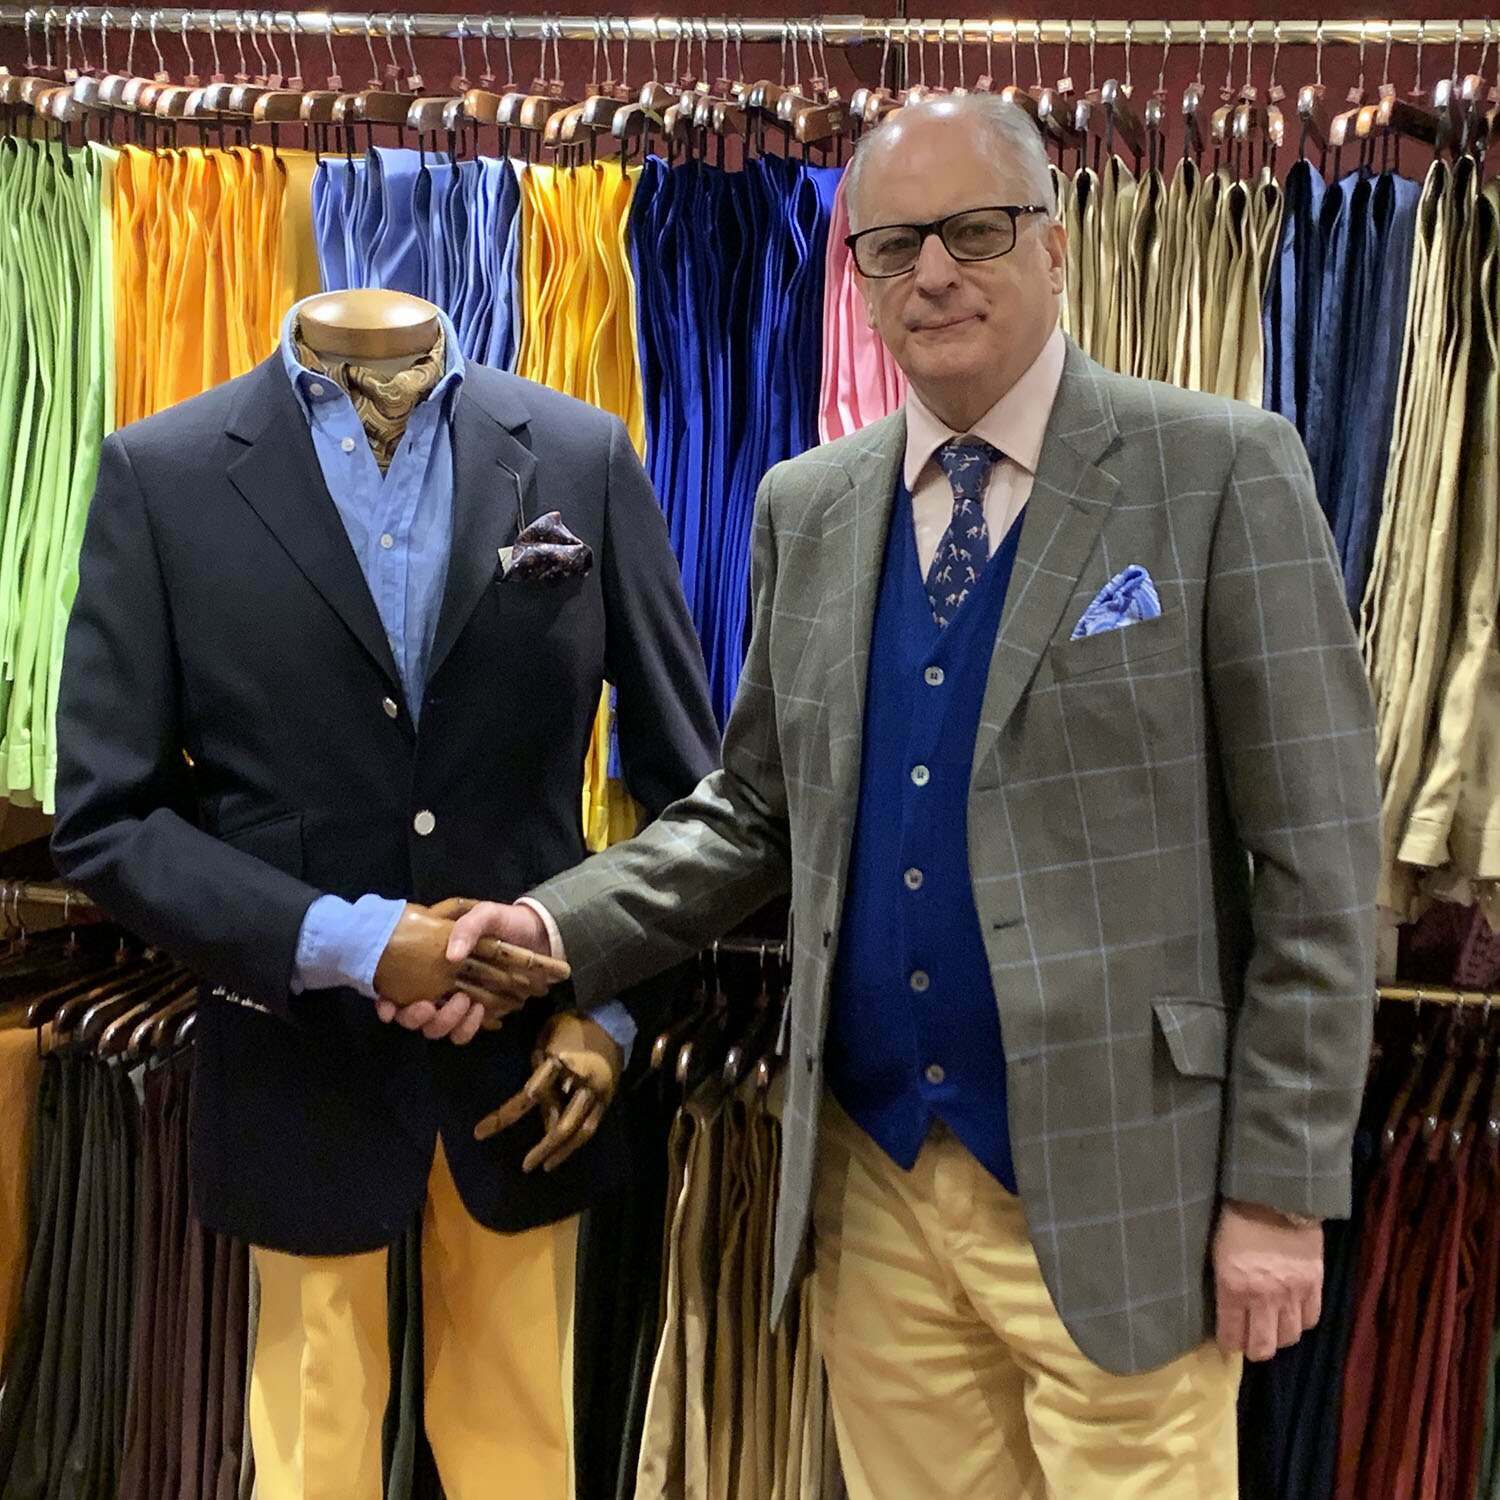 Conrad and a Cordings mannequin shaking hands